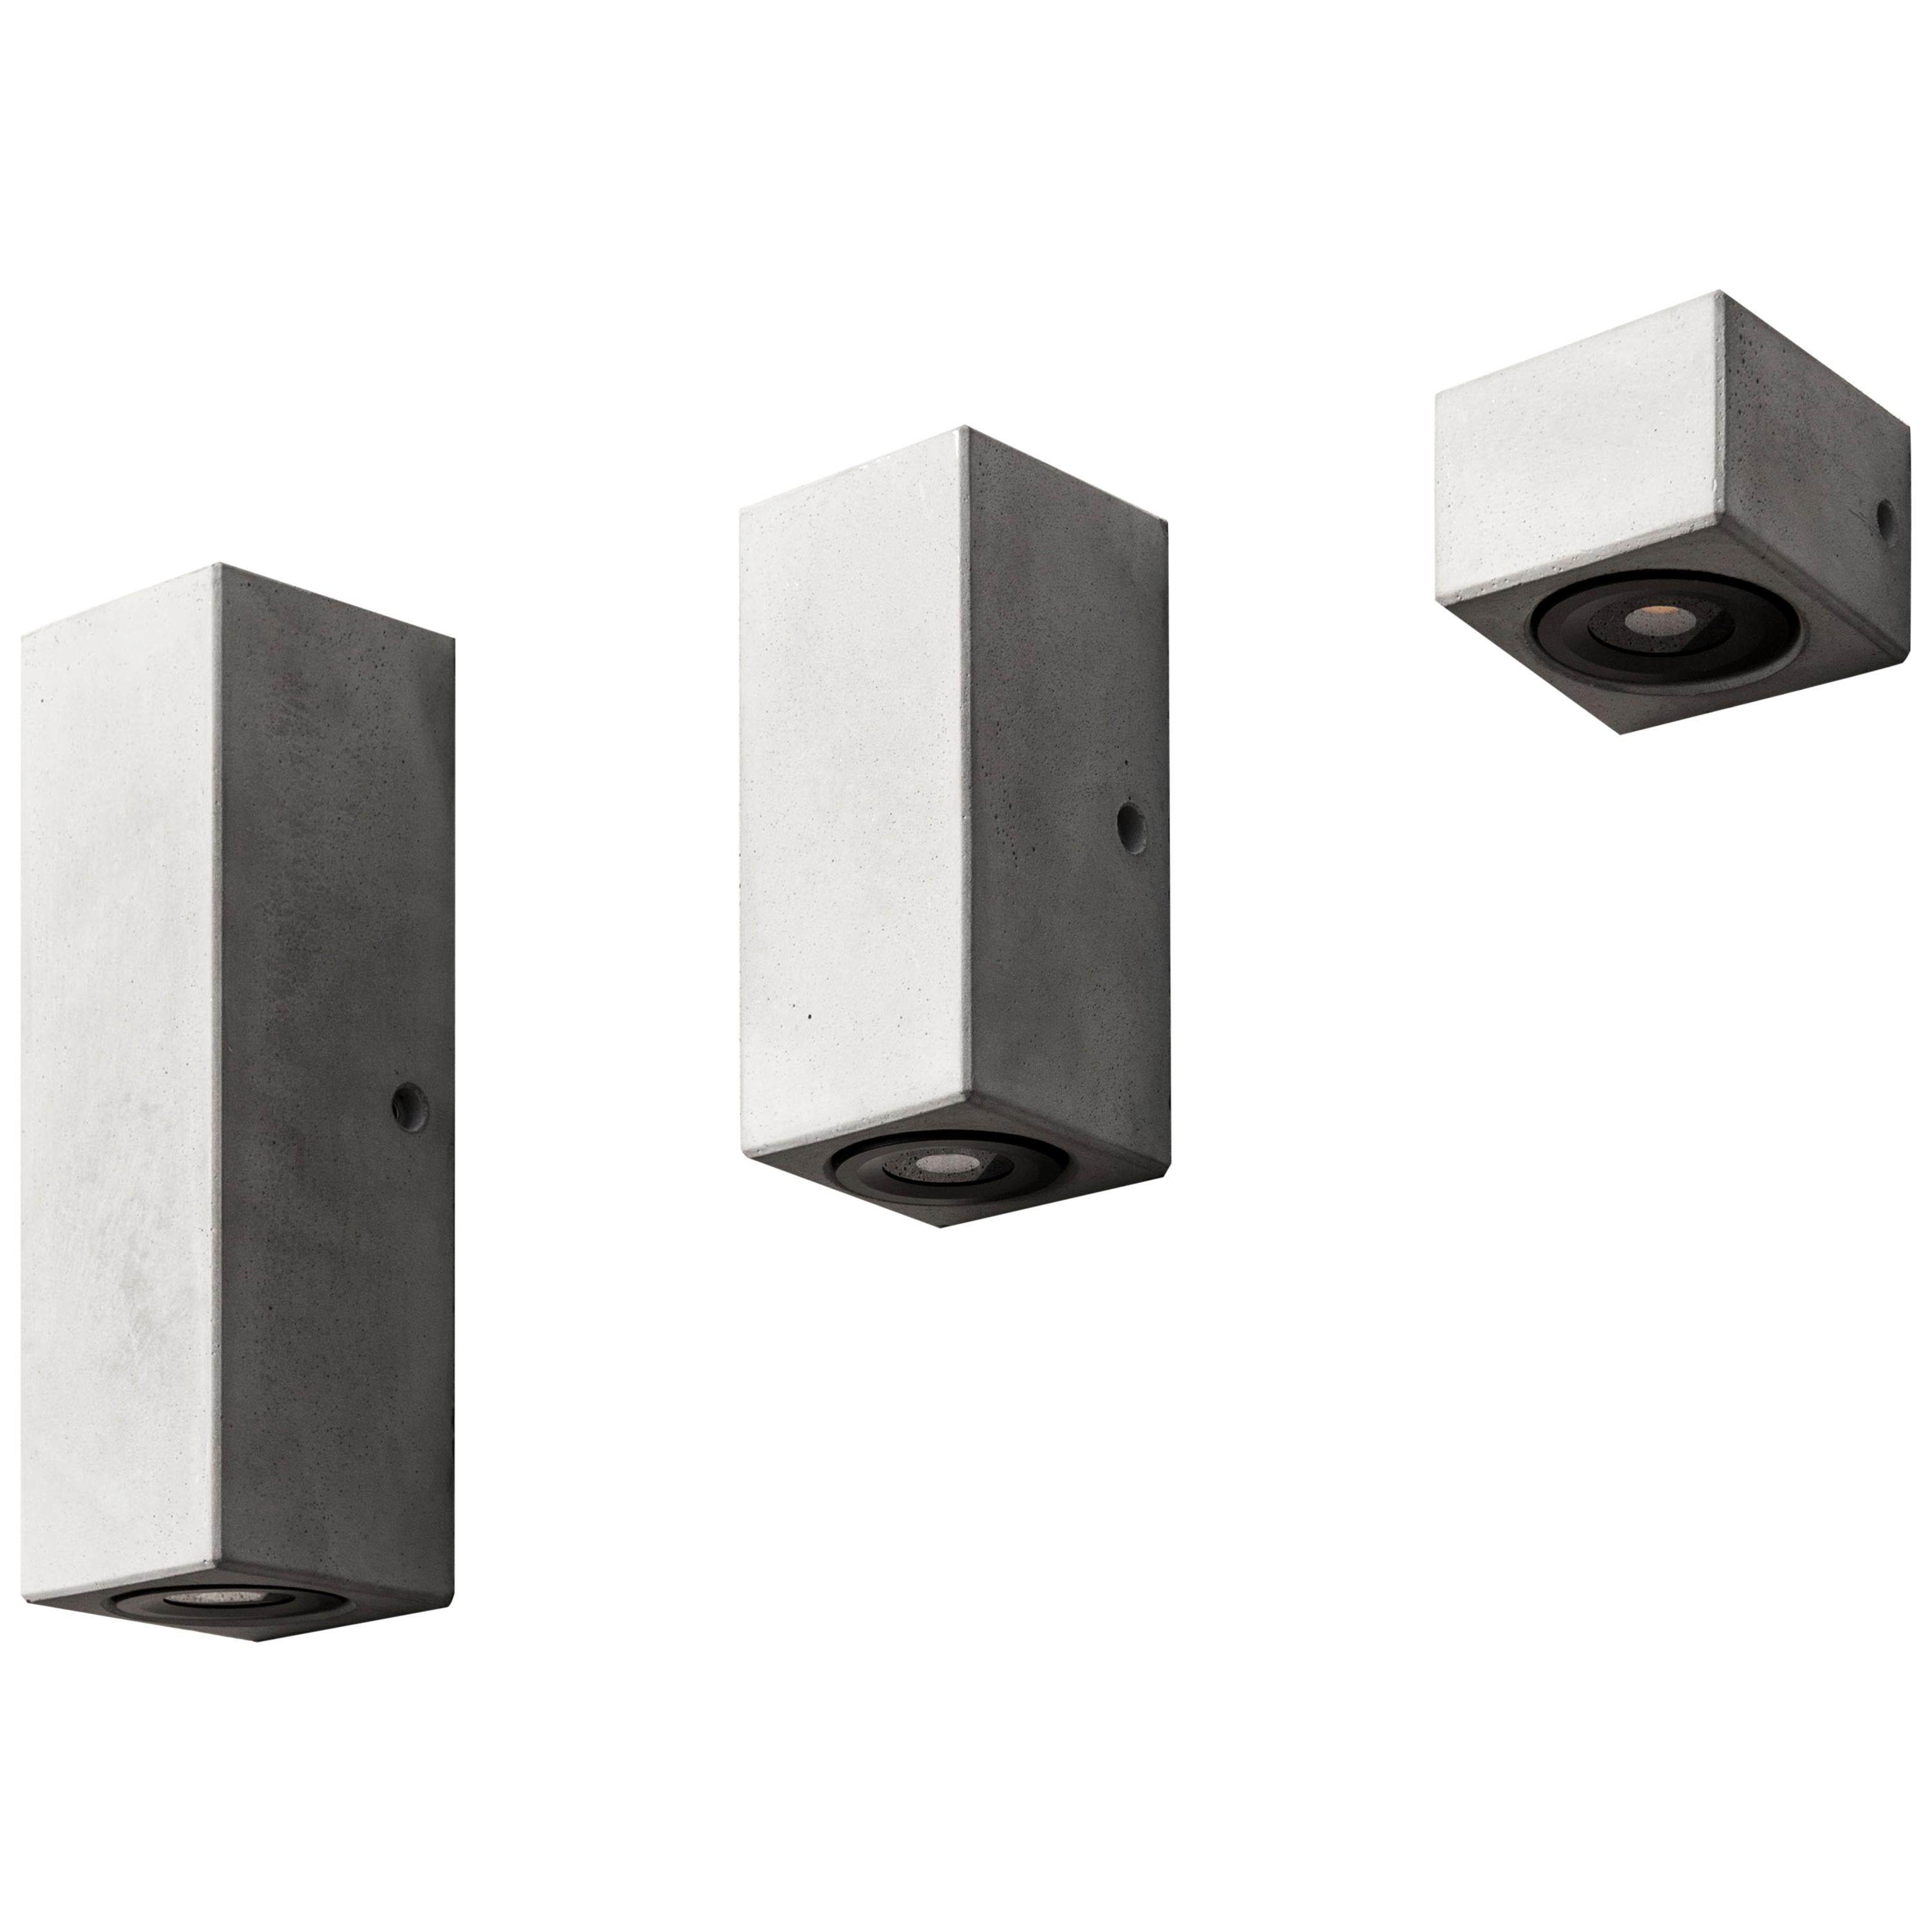 Concrete and Aluminum Wall Lamp, “D, ” L, from Concrete Collection by Bentu